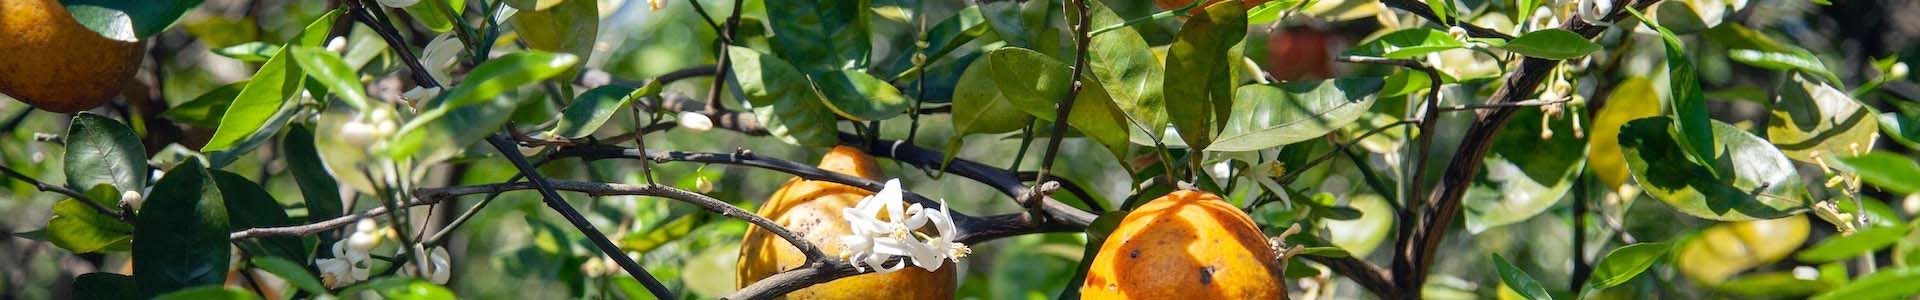 Orange Trees banner for worship & ministry page 